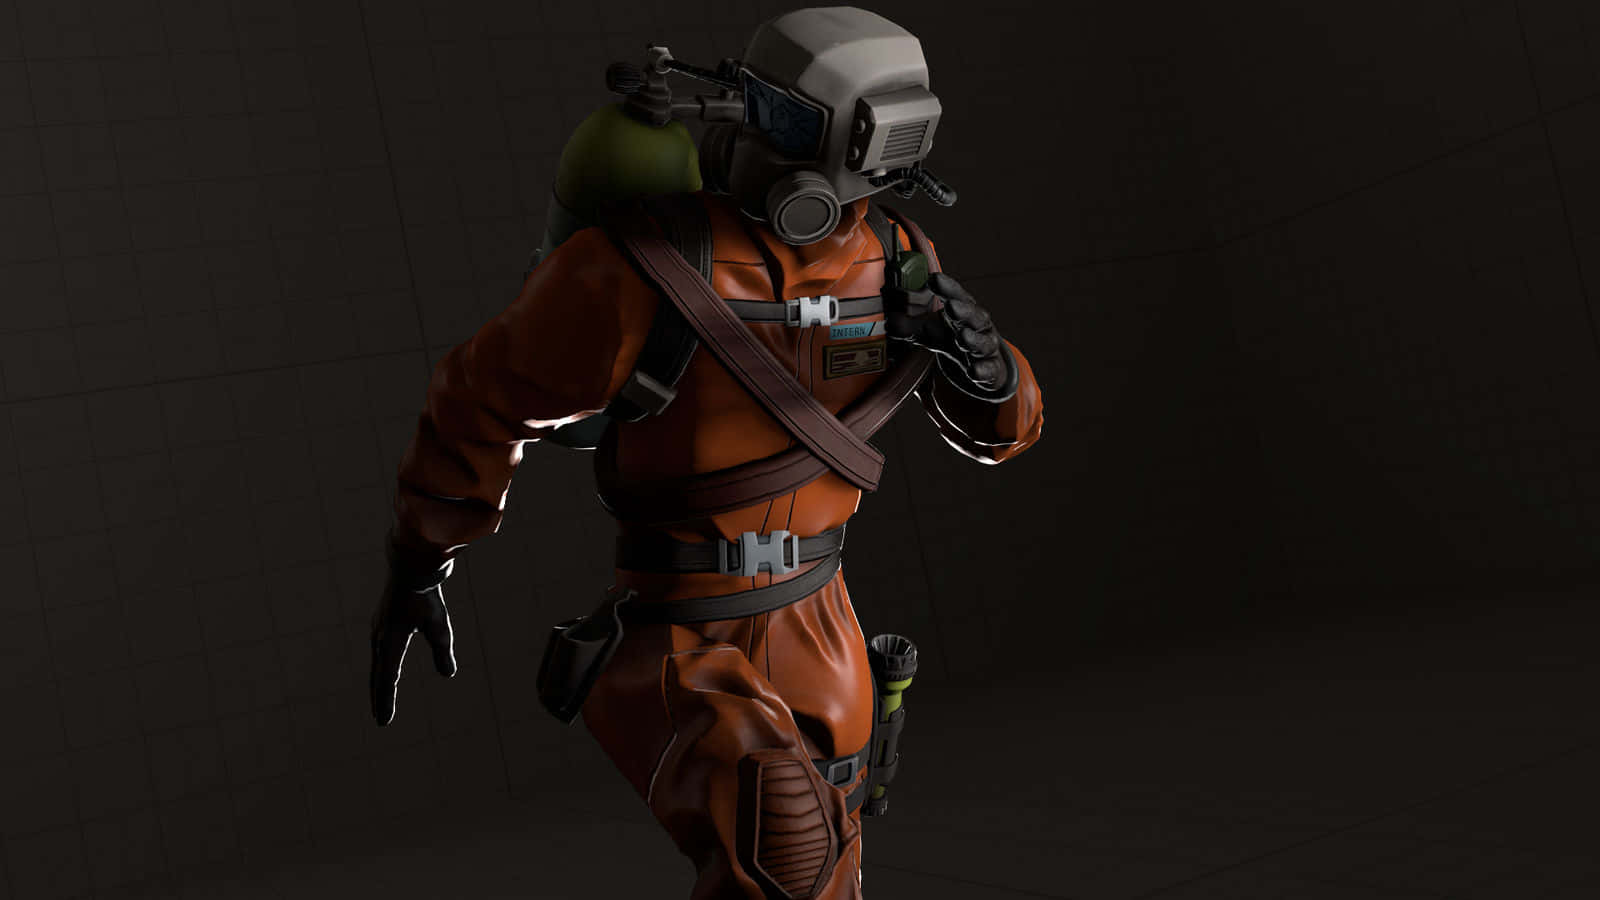 Tactical Pilot Ready For Mission Wallpaper